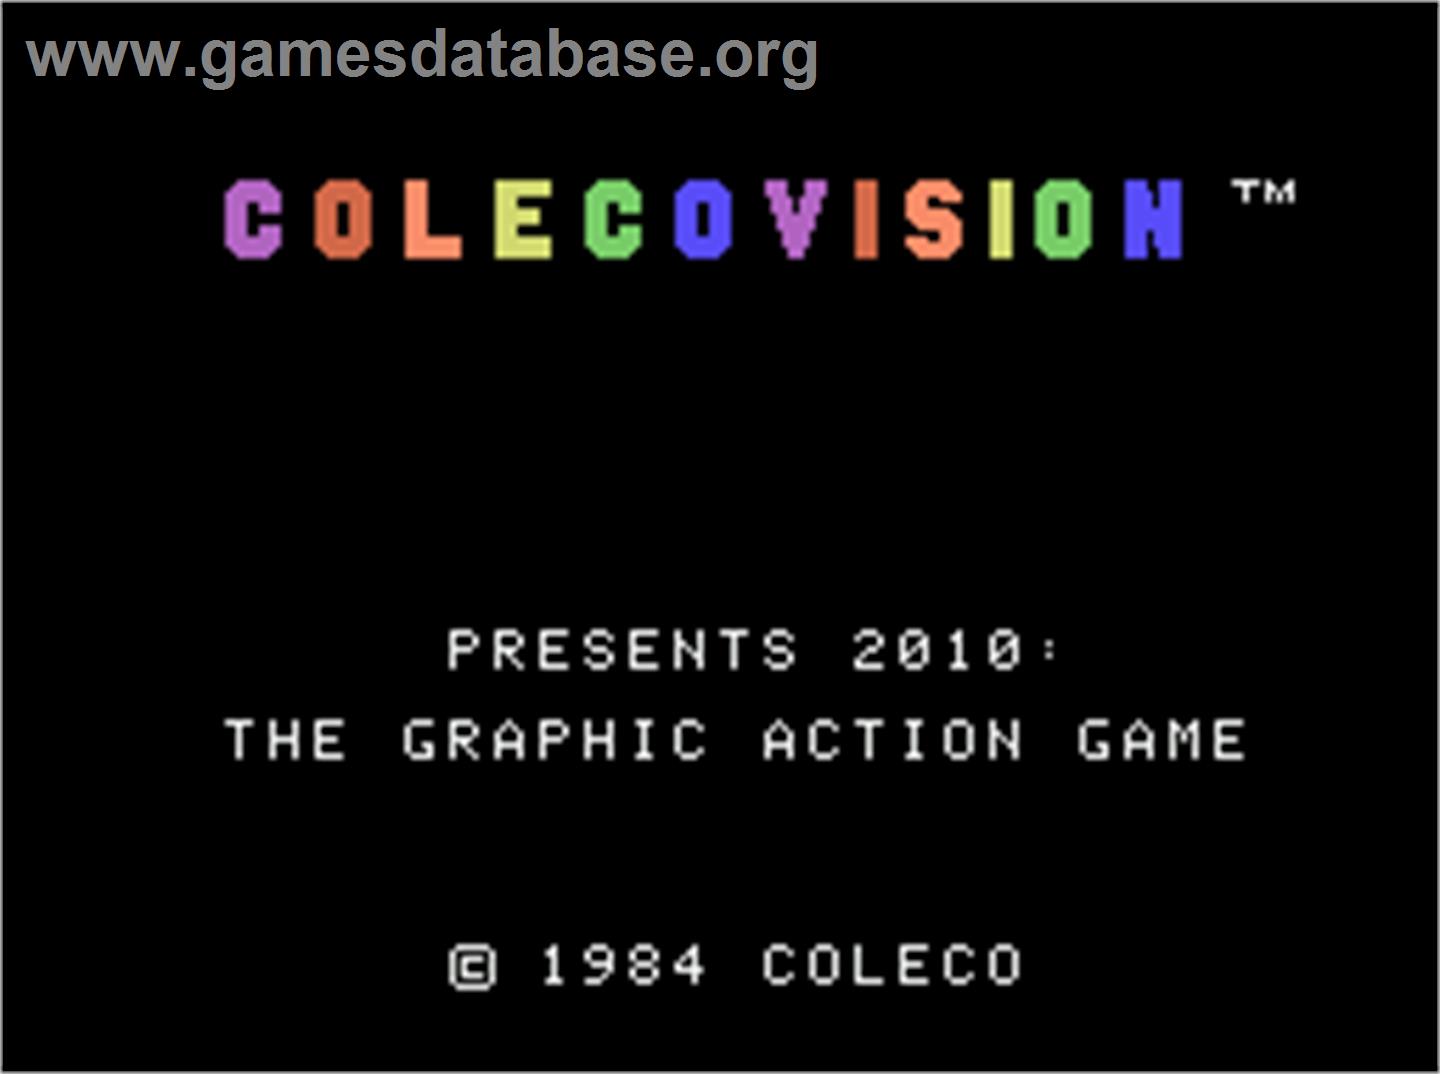 2010: The Graphic Action Game - Coleco Vision - Artwork - Title Screen